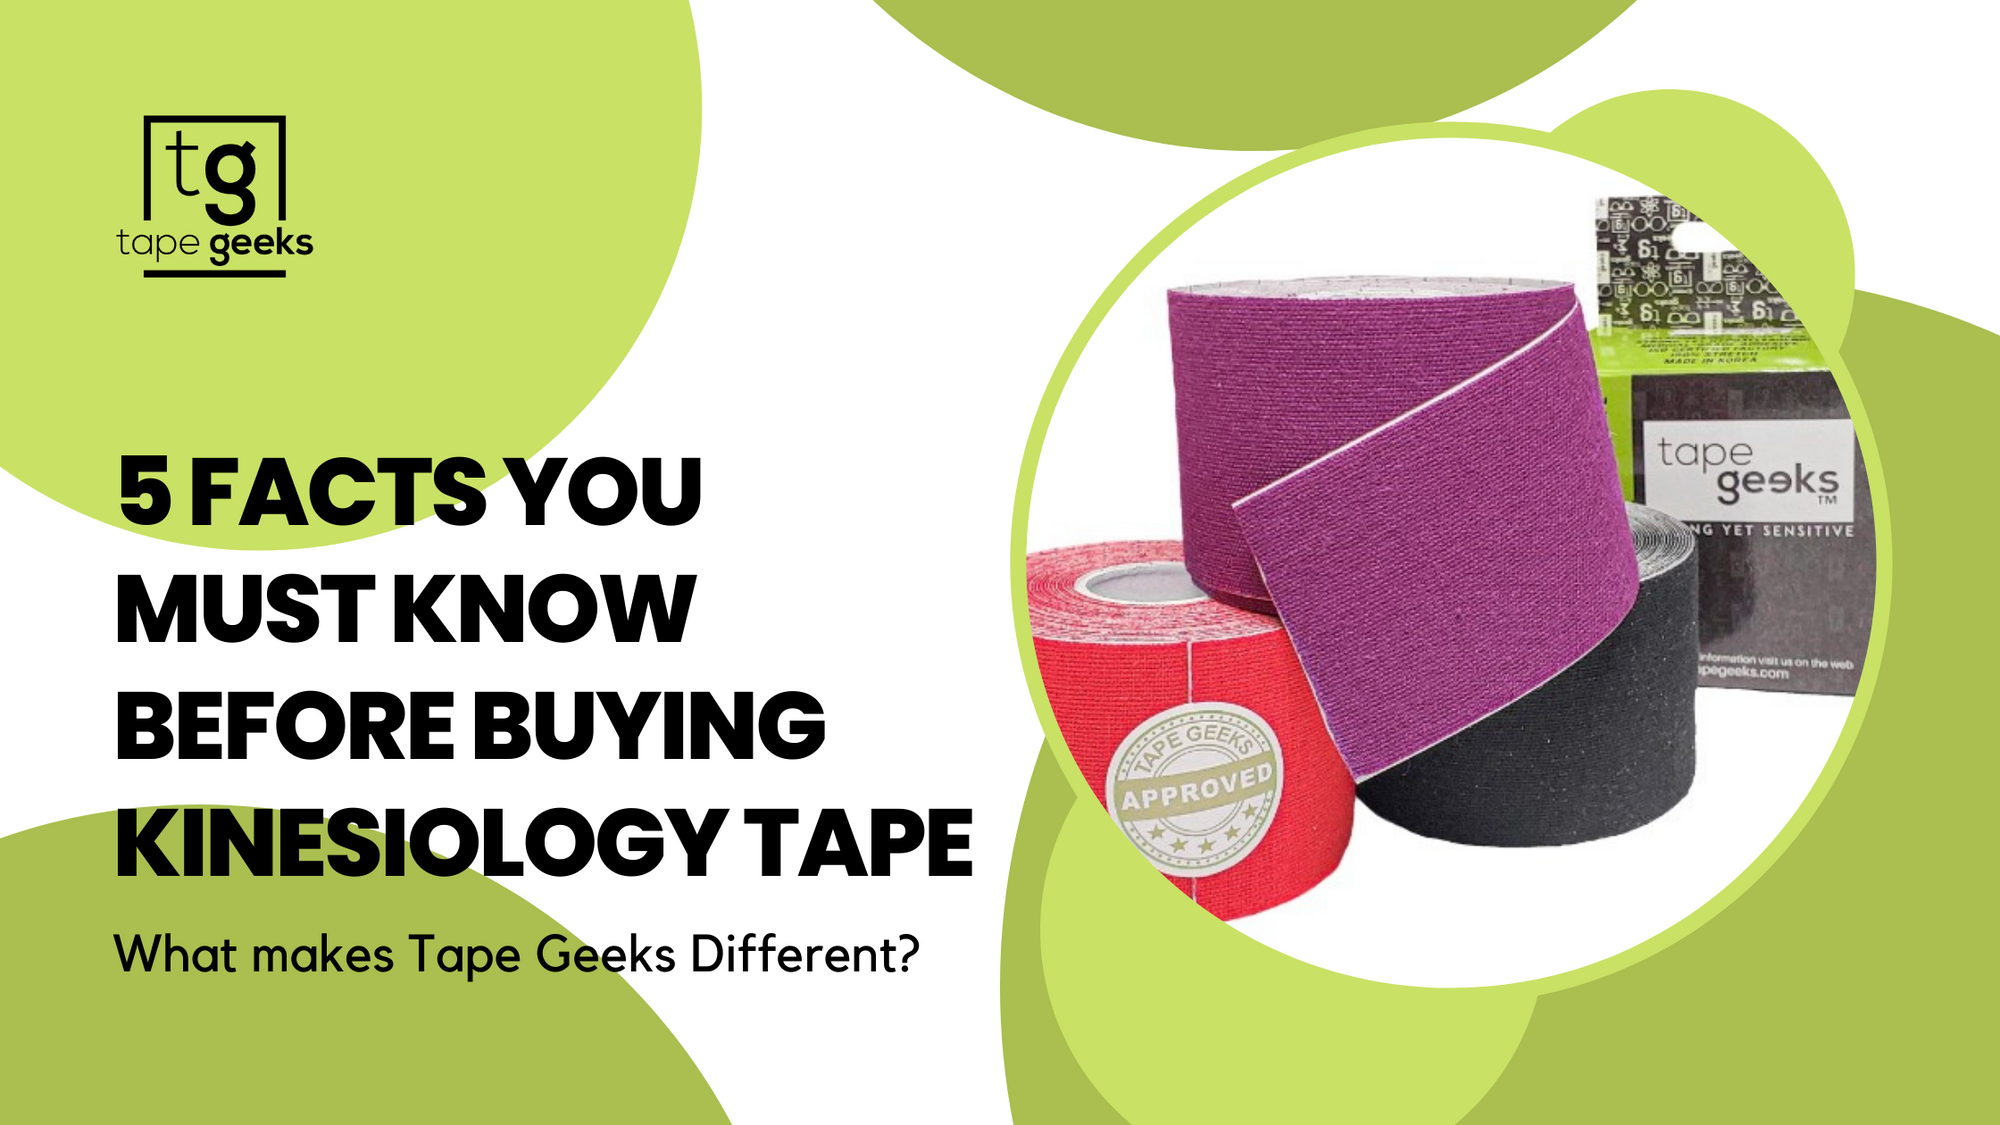 5 FACTS YOU MUST KNOW BEFORE YOU BUY KINESIOLOGY TAPE